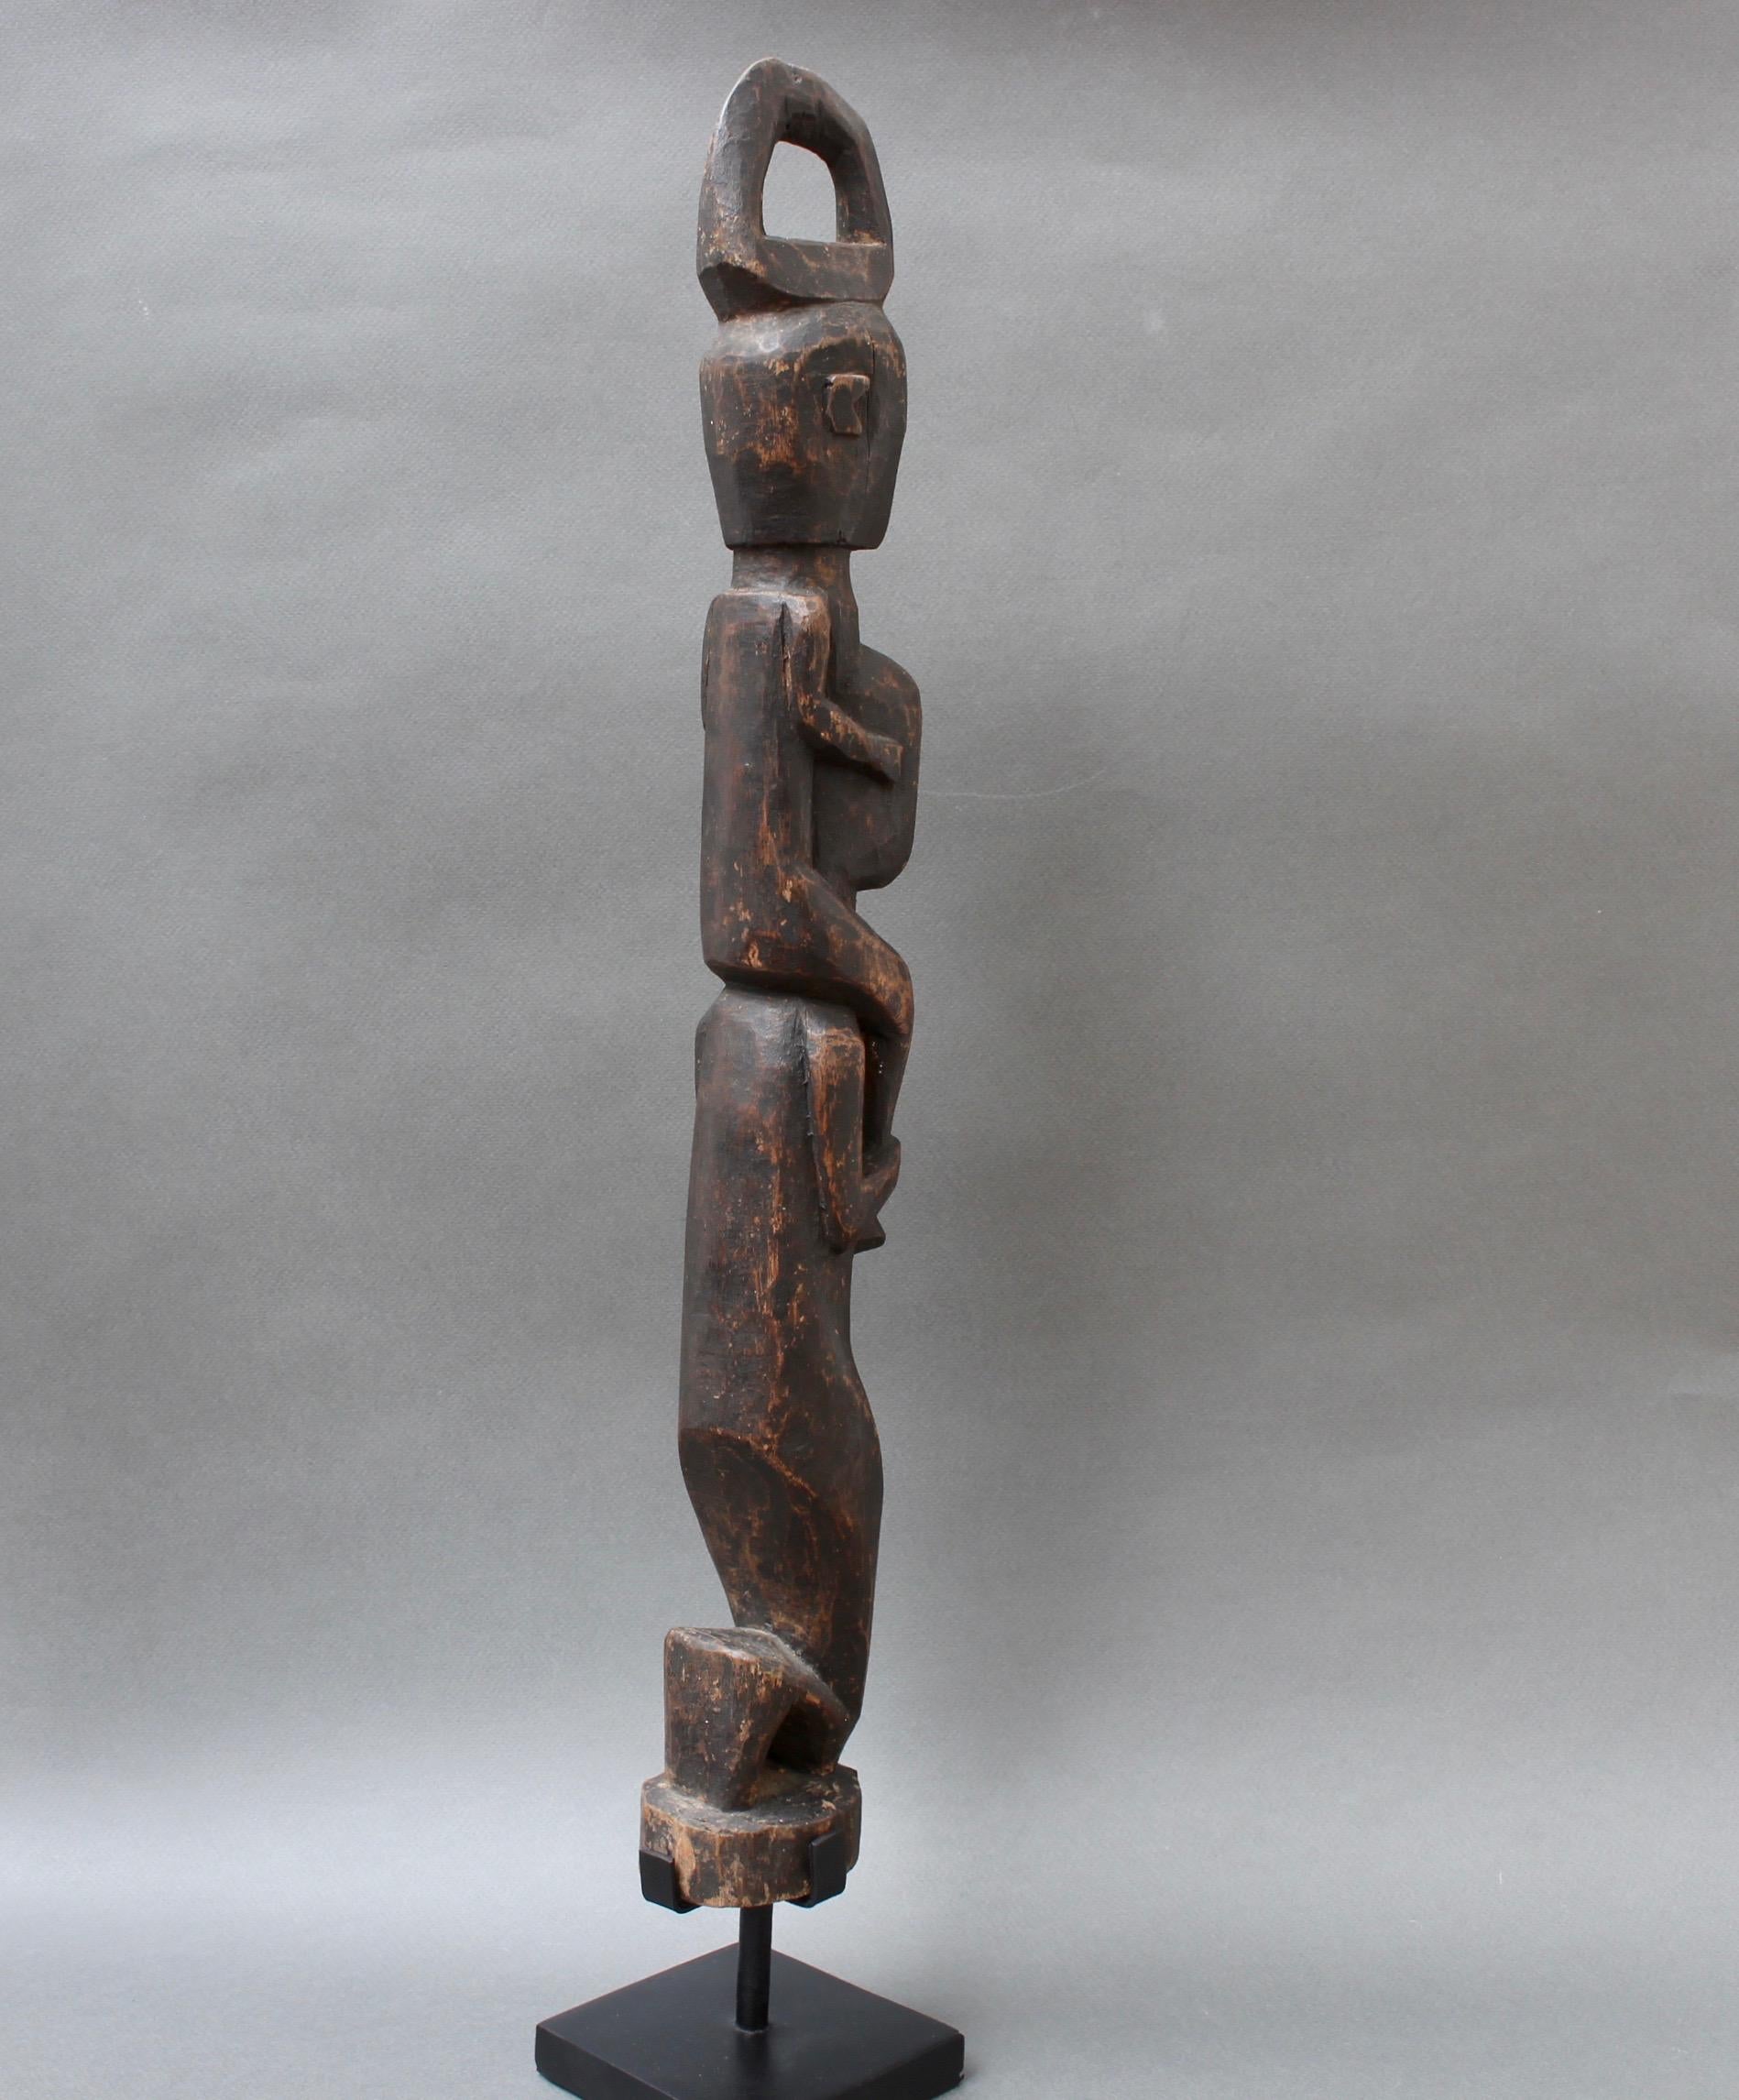 Indonesian Wooden Sculpture of Totemic Figures from Timor Island, Indonesia, circa 1970s